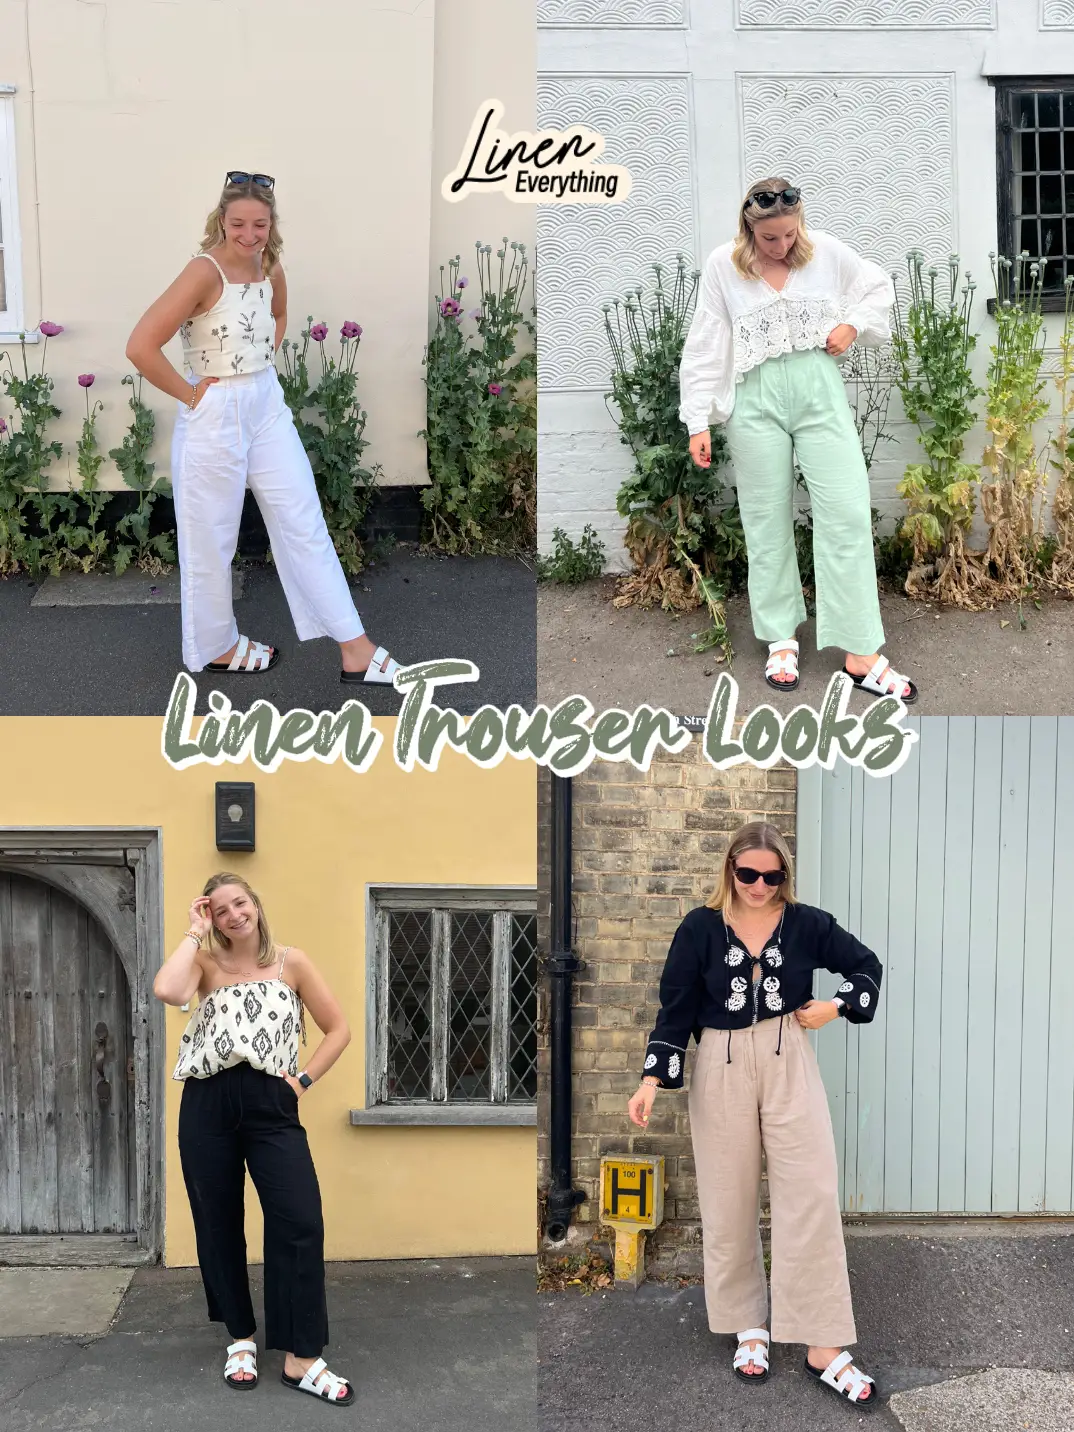 How To Wear Linen Pants ? 20 Outfit Ideas